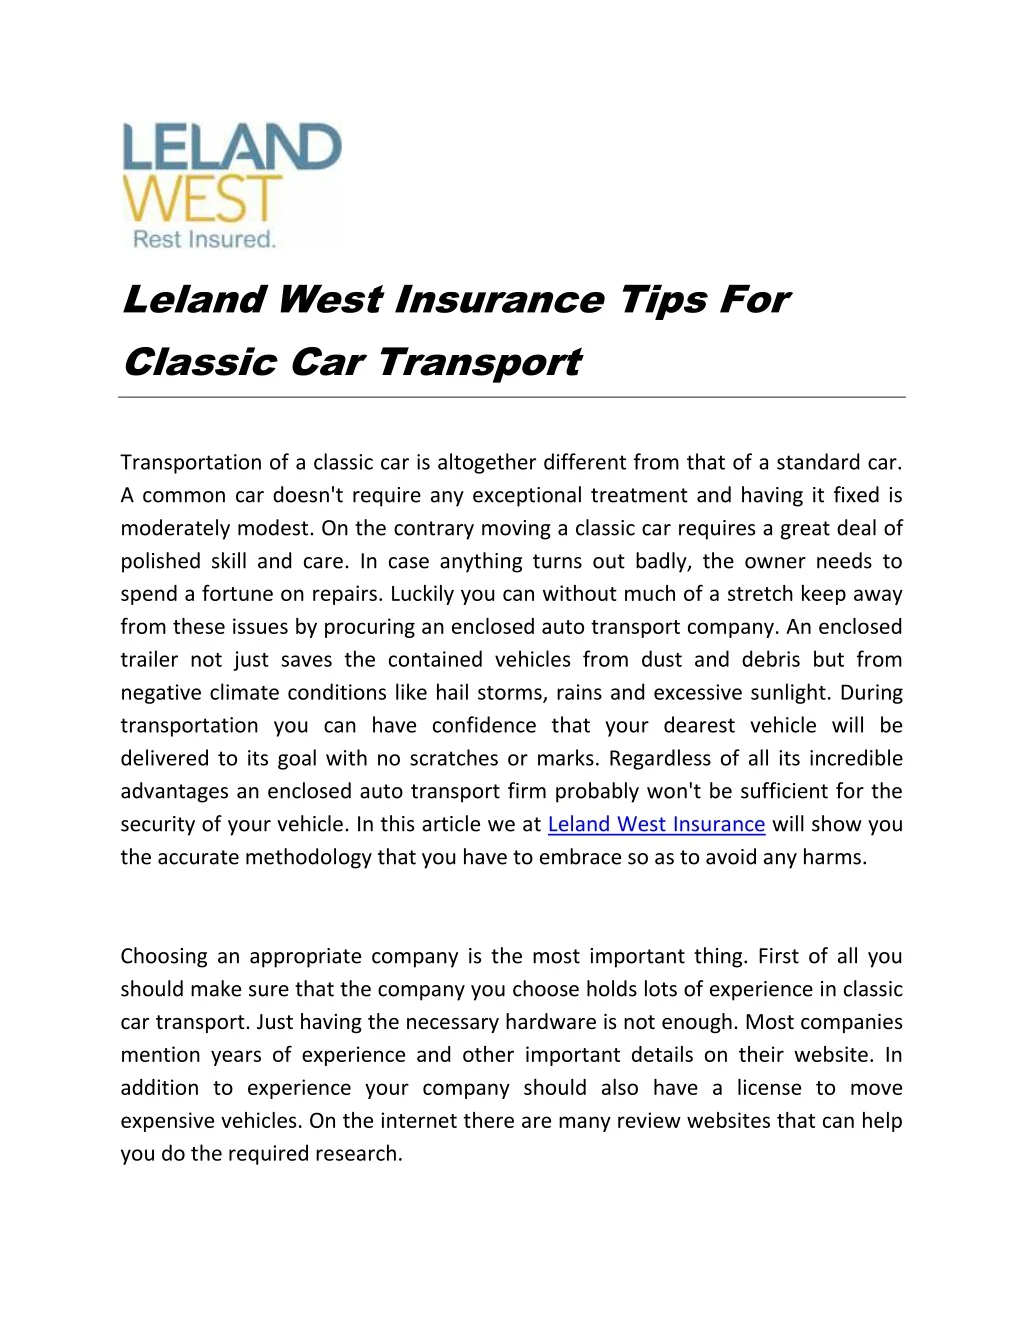 leland west insurance tips for classic